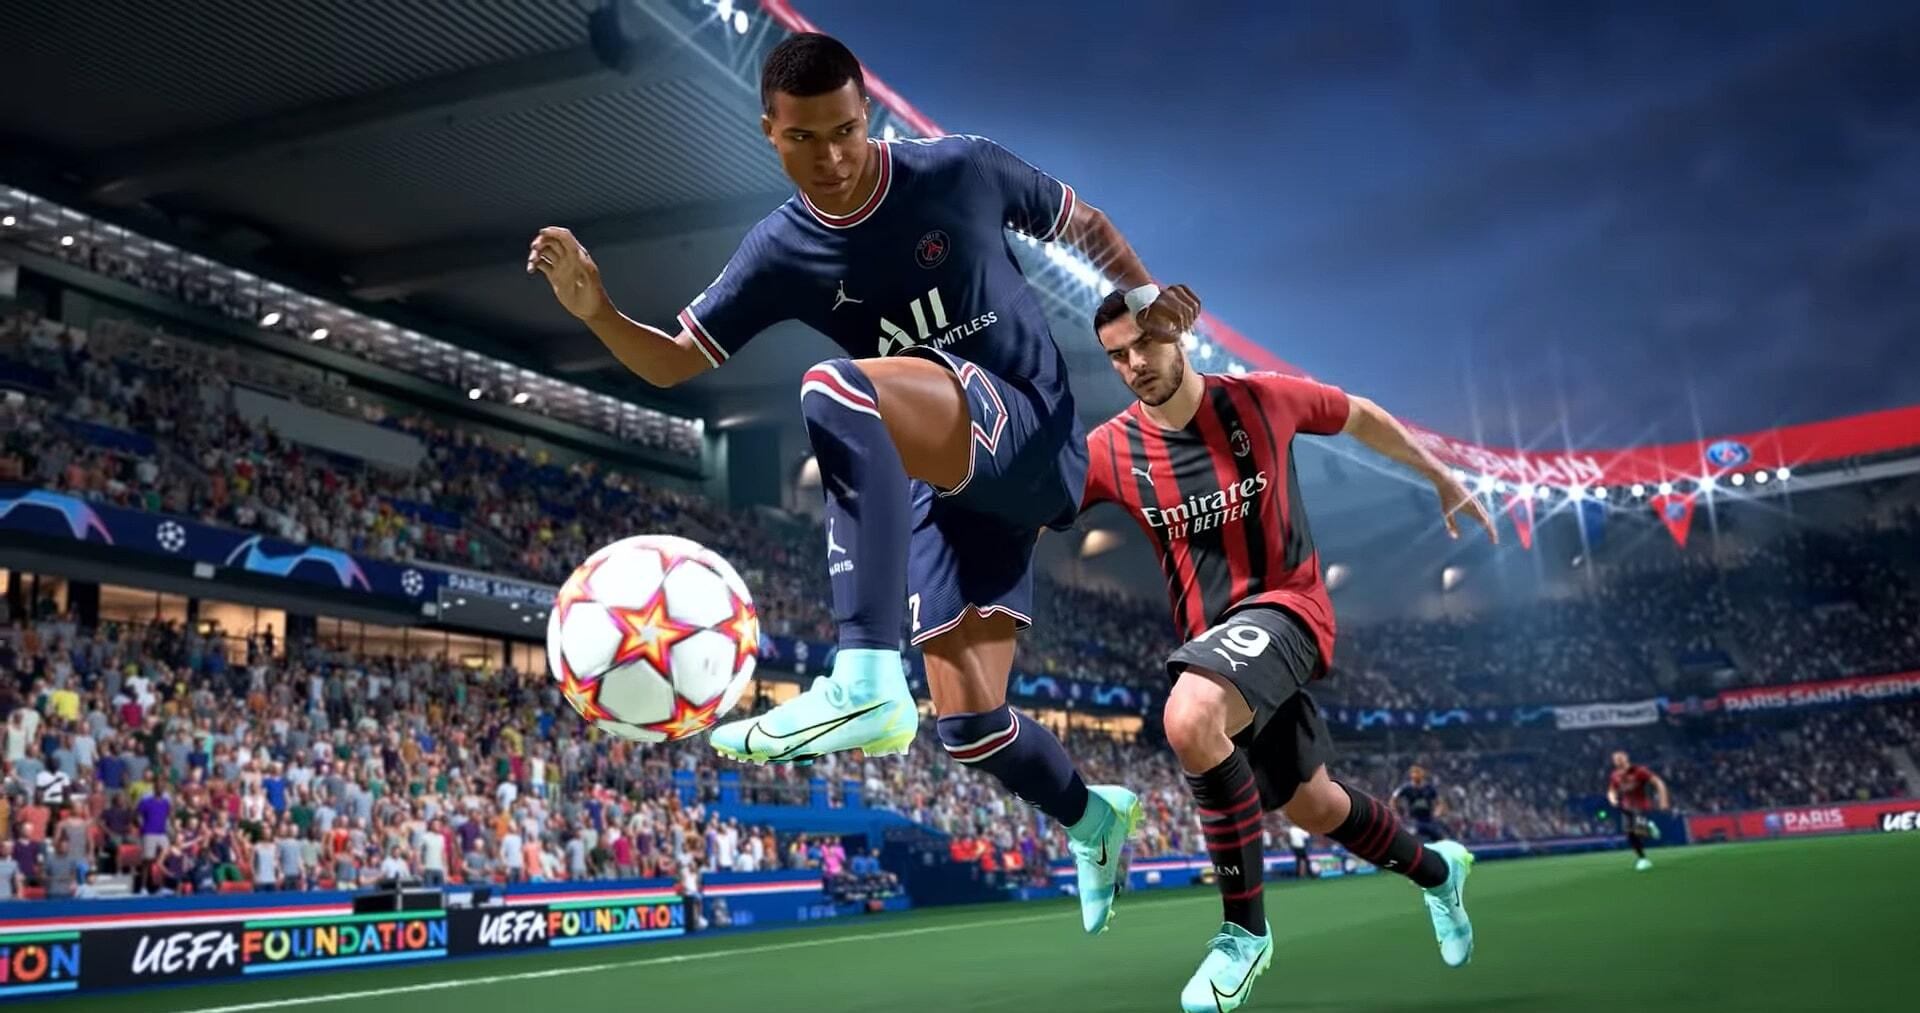 play3 Review: FIFA 22 im Test: Stadionatmosphäre auf PS5